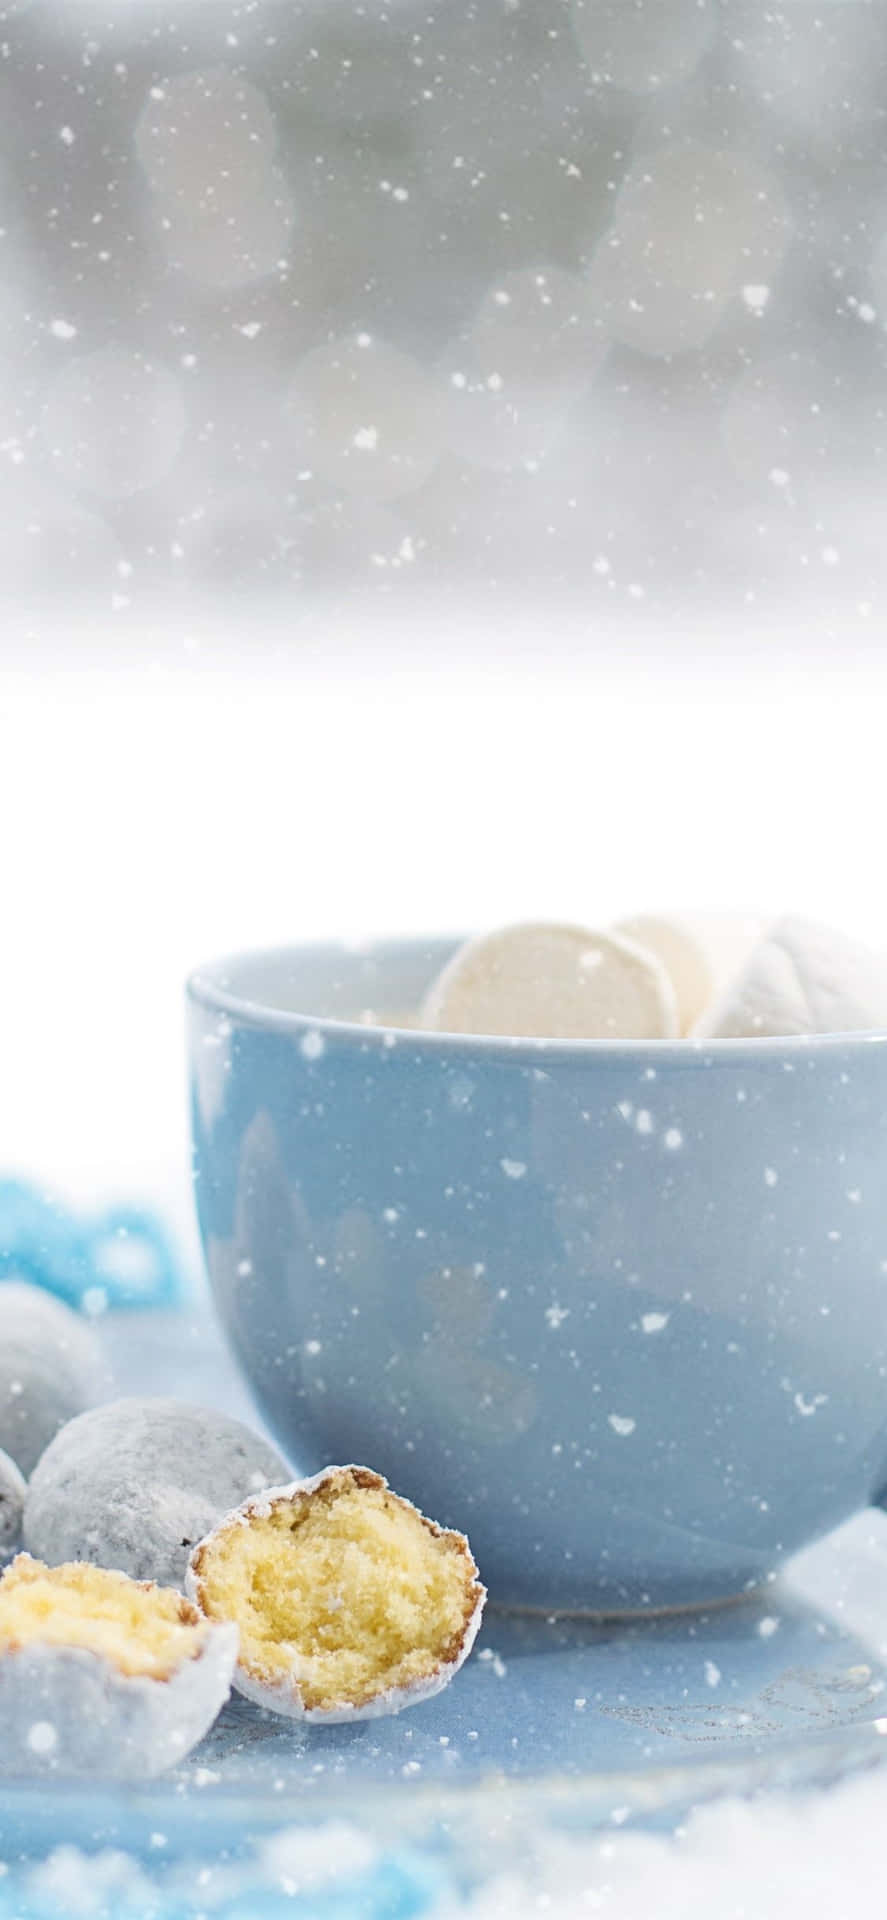 A Delicious Winter Dessert Waiting to Be Enjoyed Wallpaper